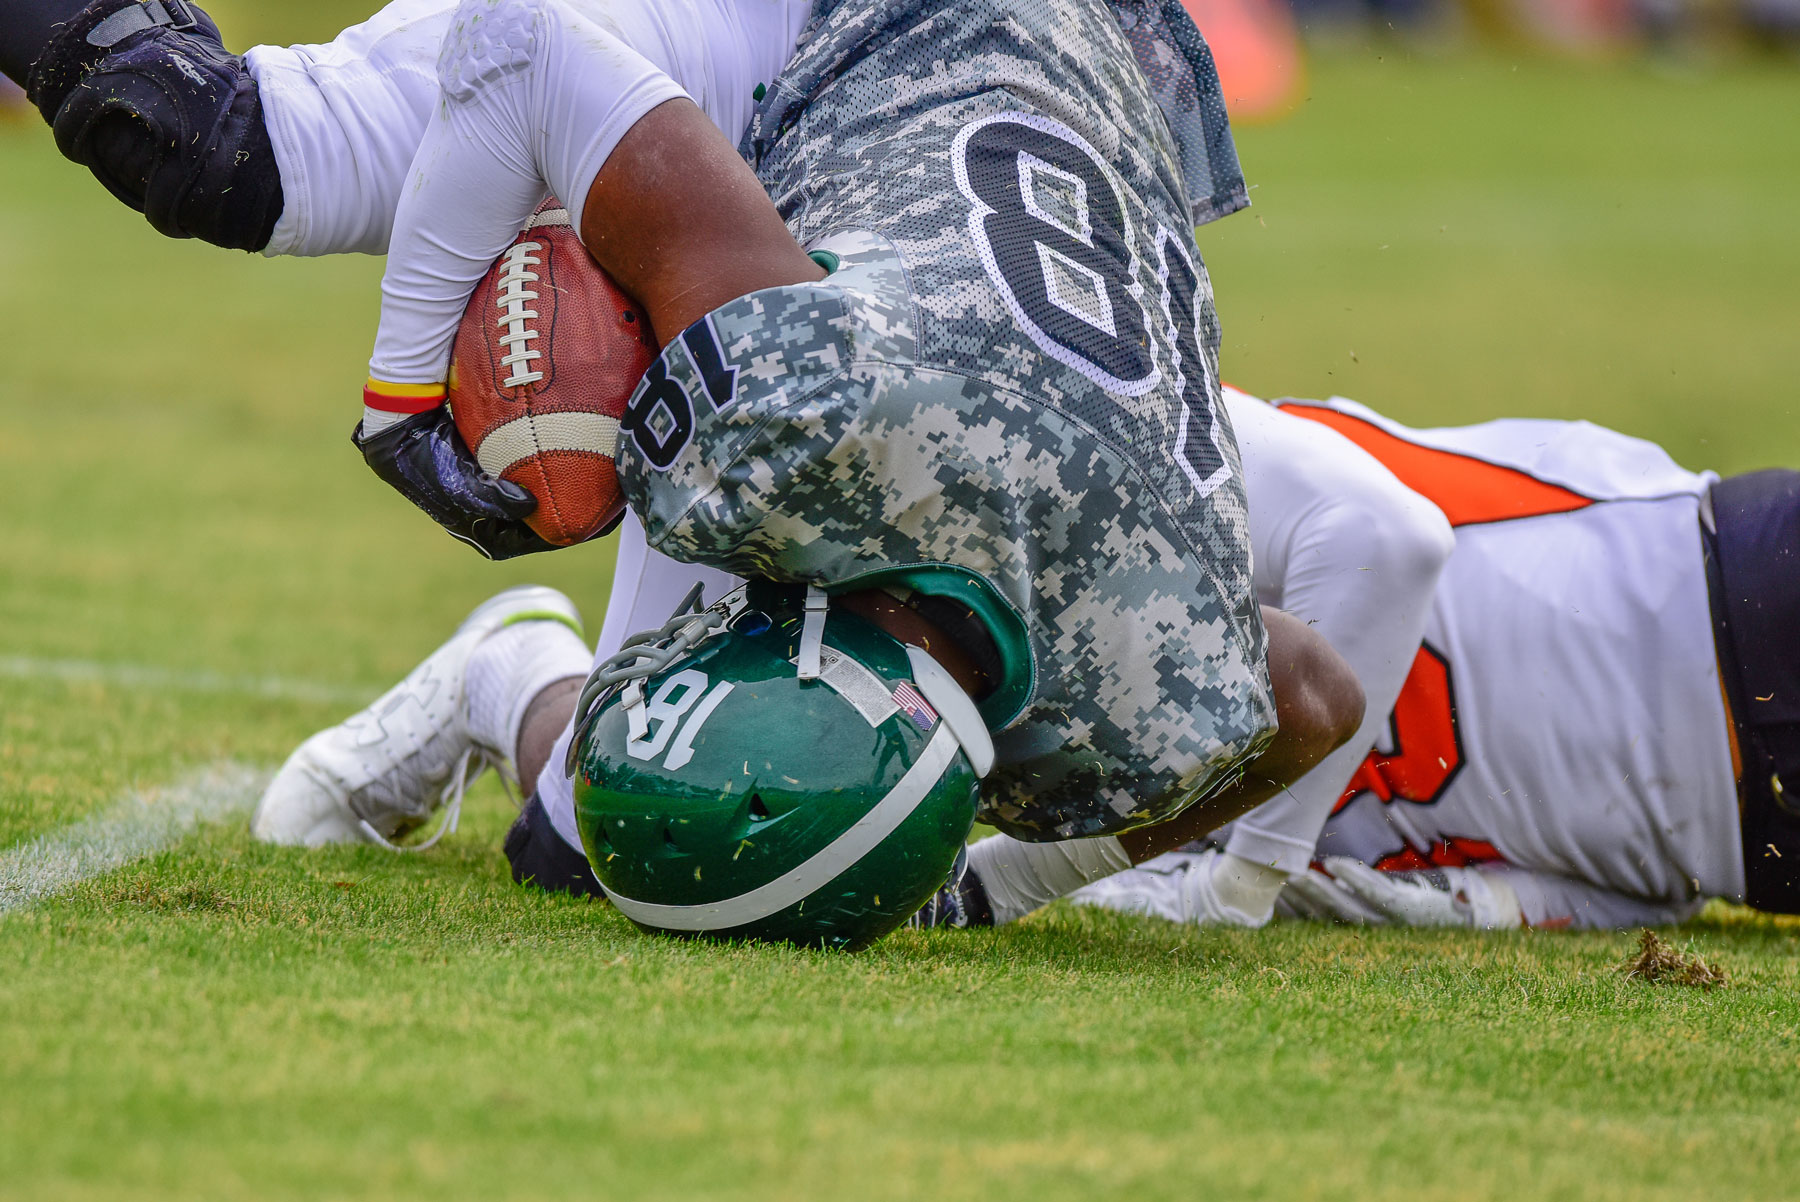 New study finds conclusive evidence that repetitive head impacts cause CTE